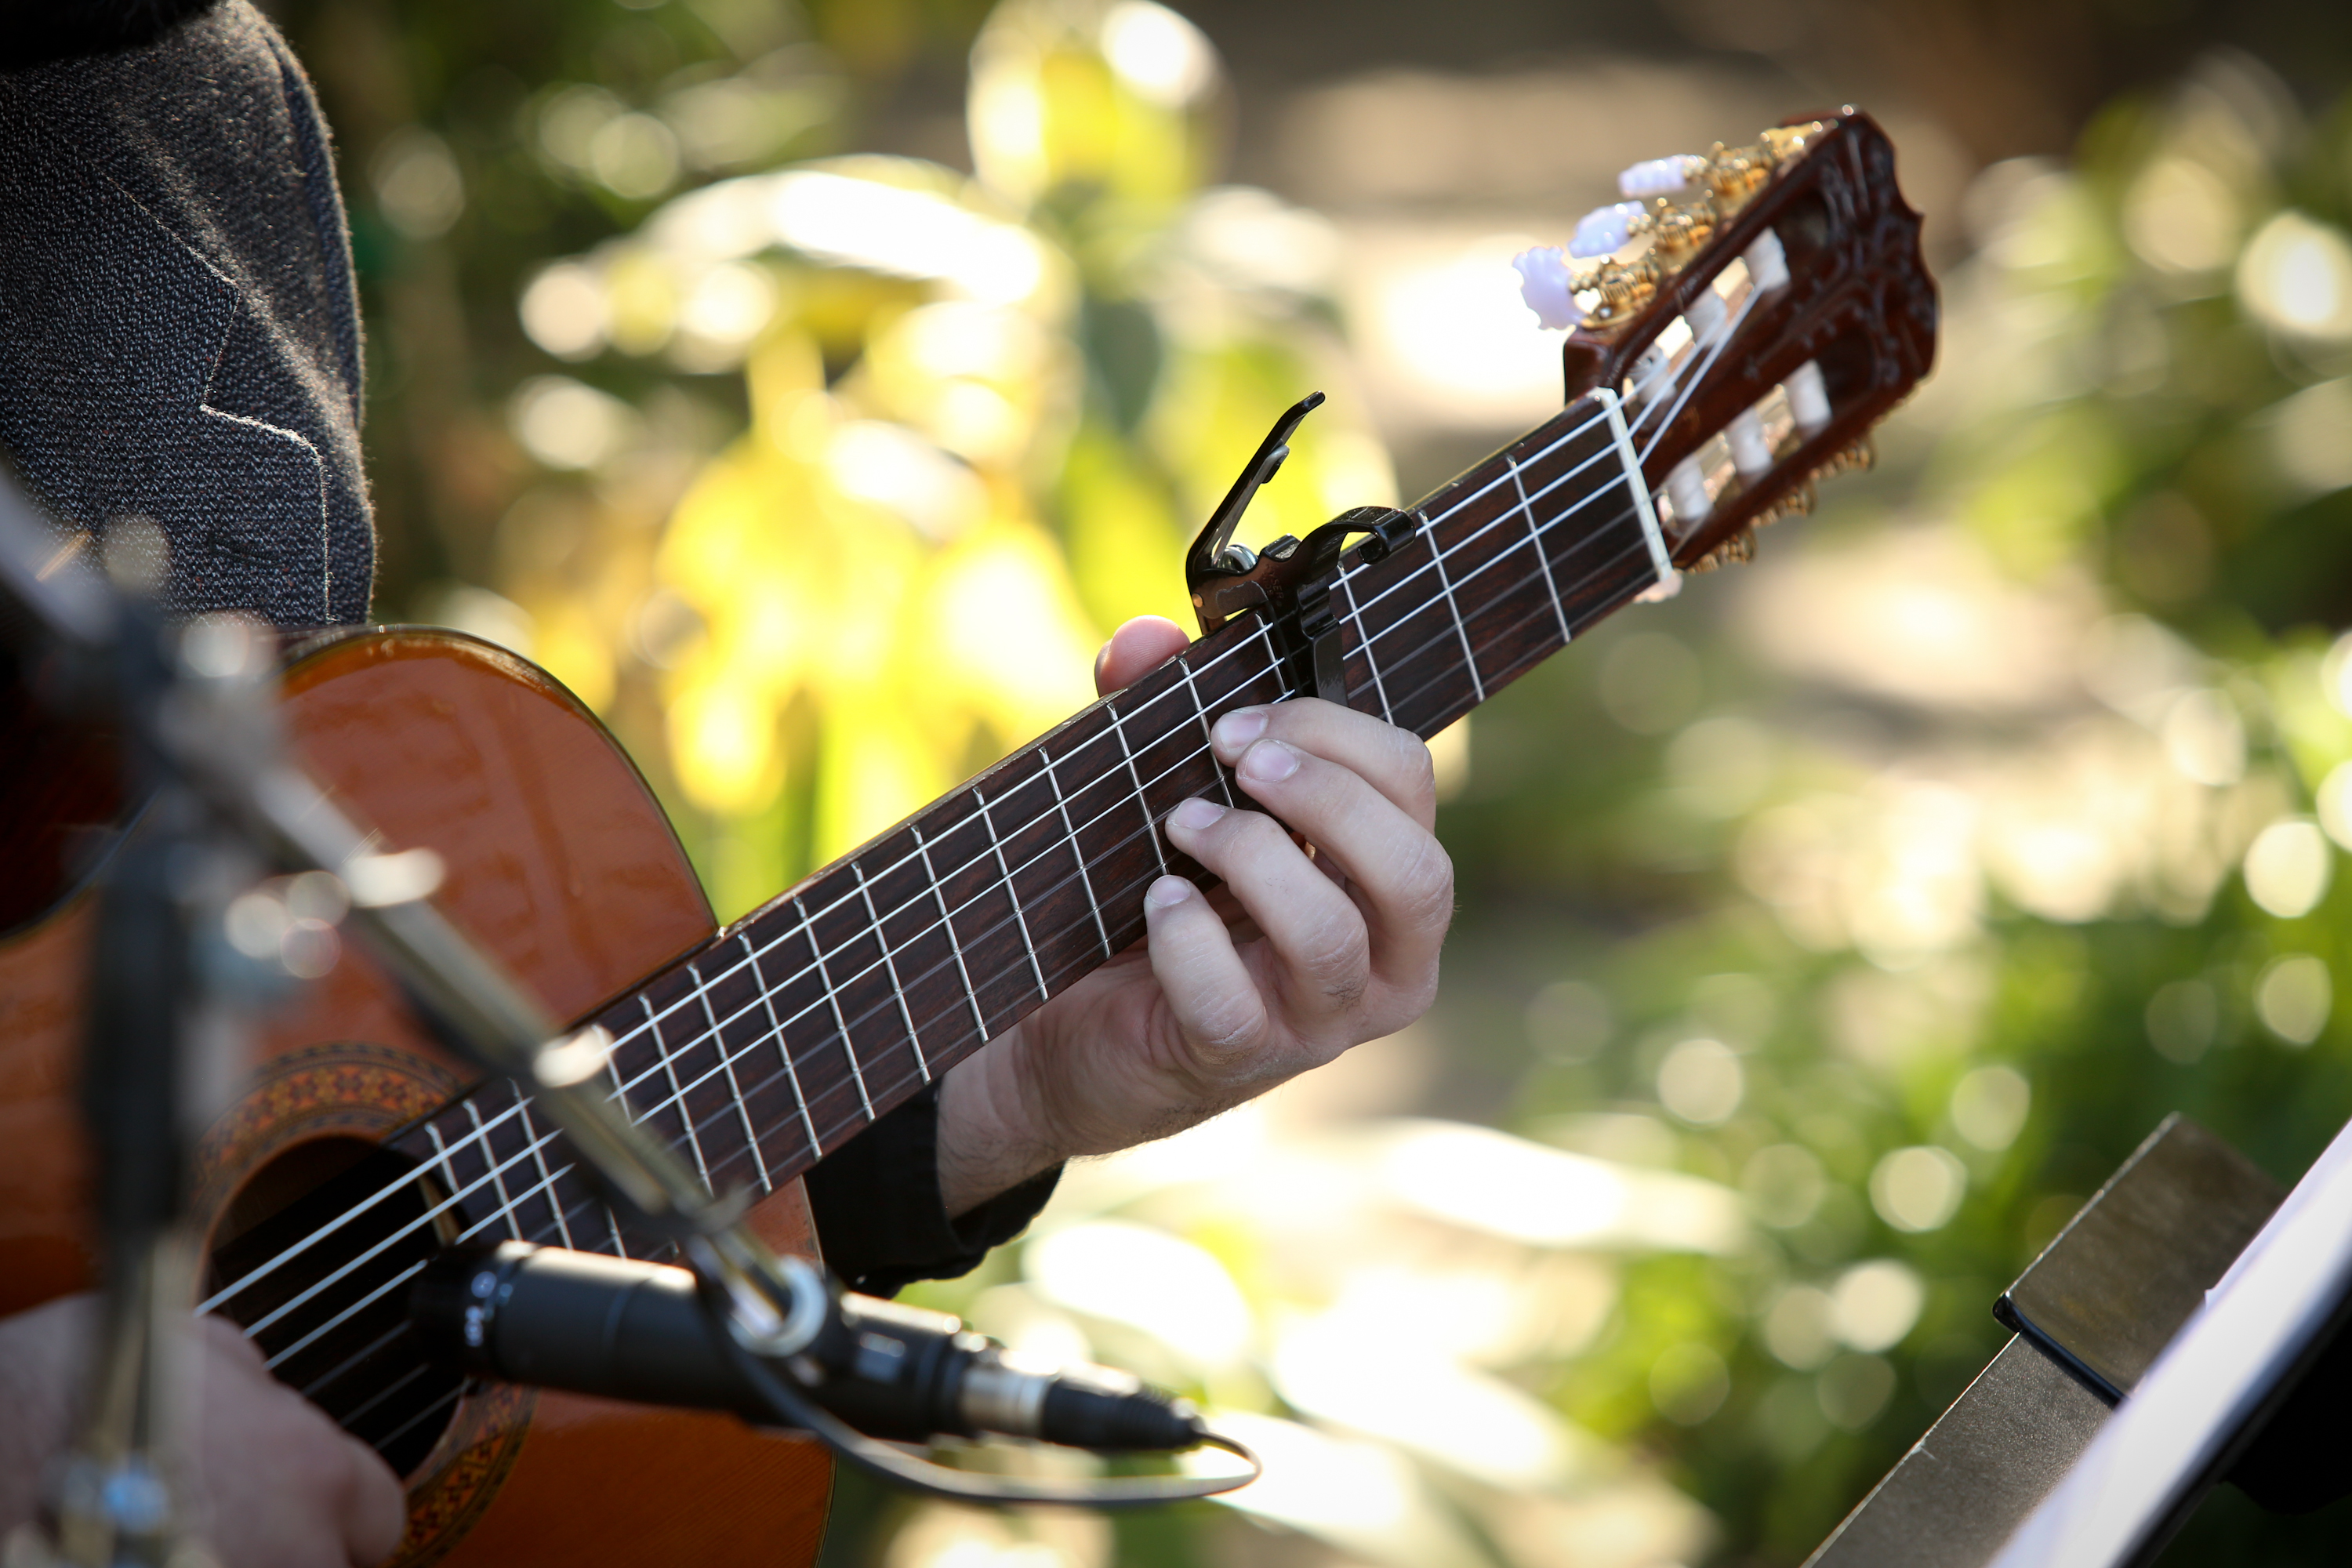 musician playing a guitar as one of the Best Wedding Vendors in Santa Barbara